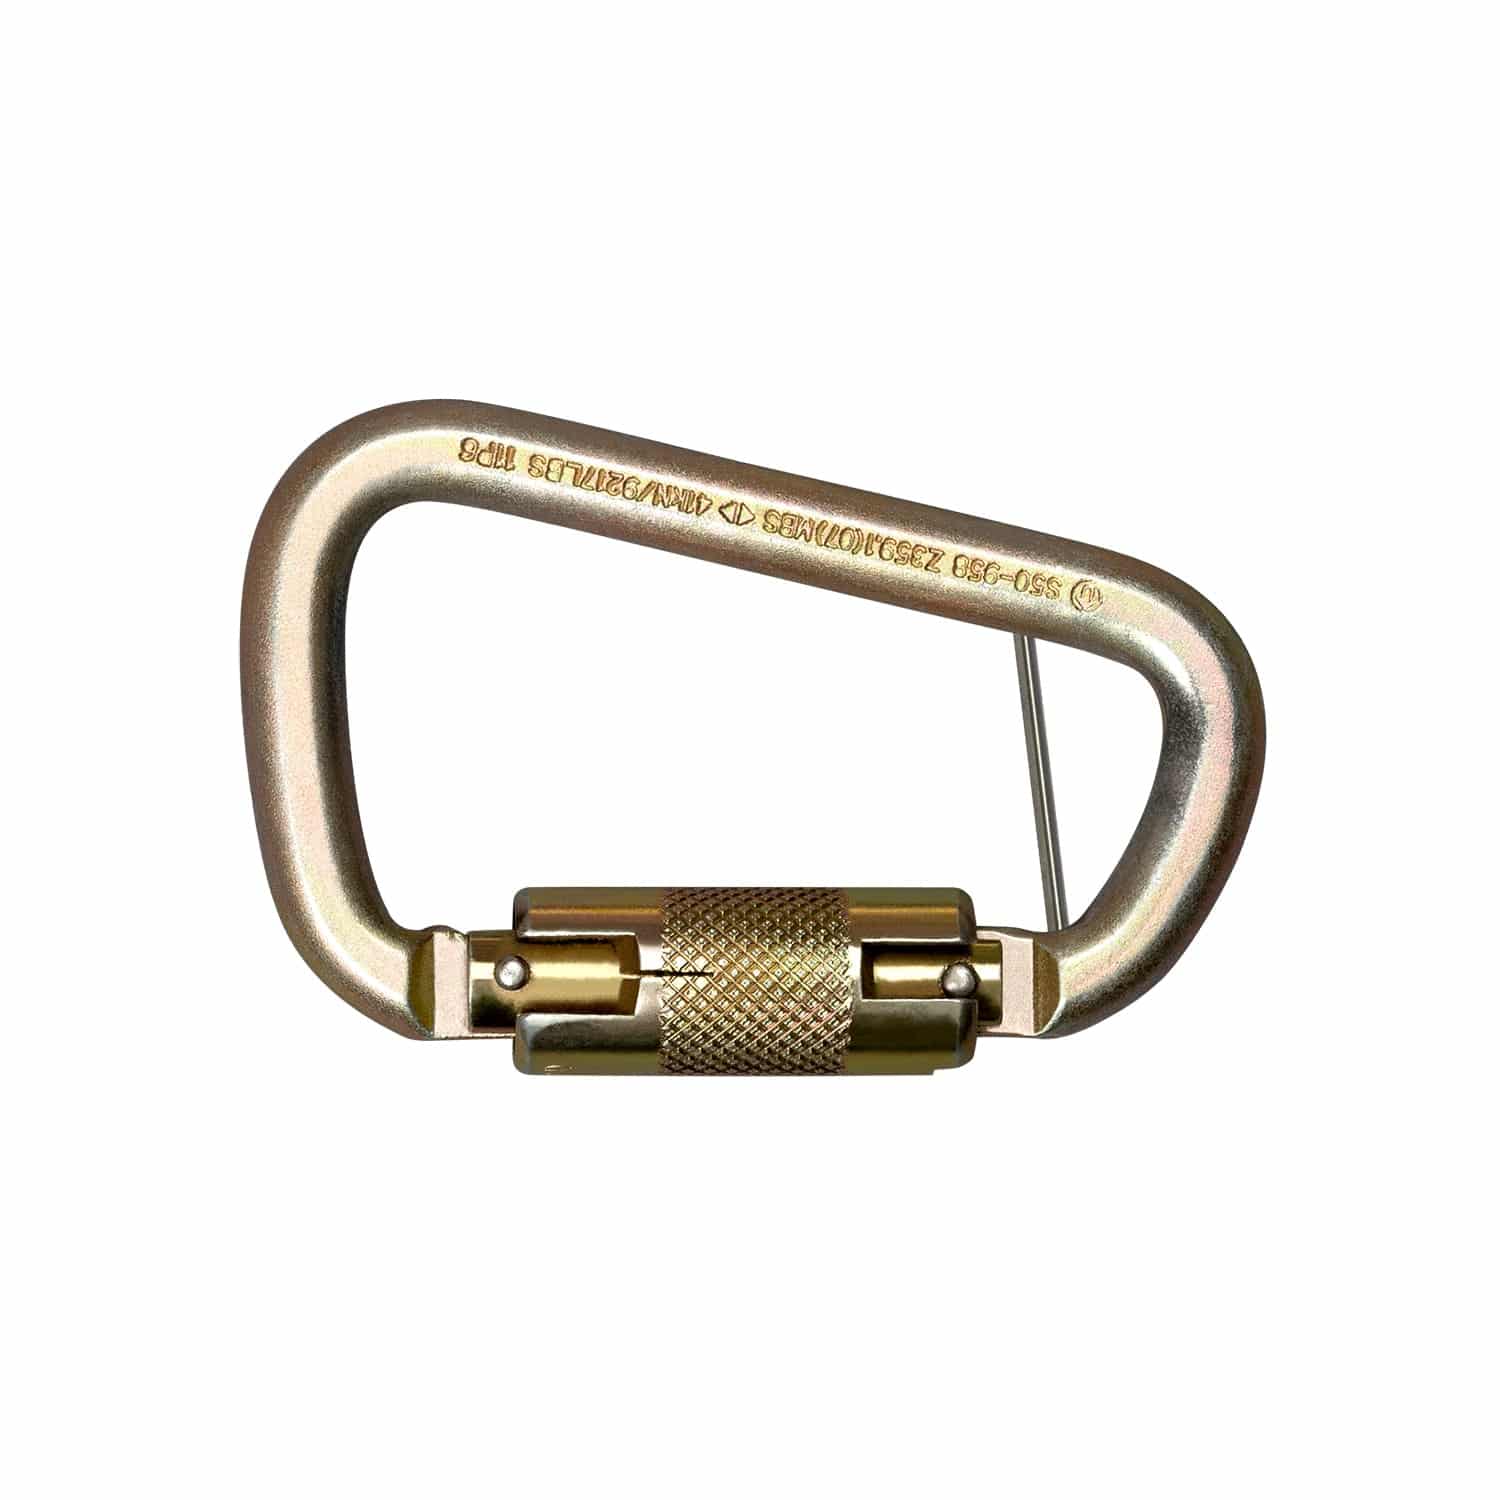 Steel Twist Lock Carabiner with Captive Pin Holes - 5005T - Buckingham  Manufacturing